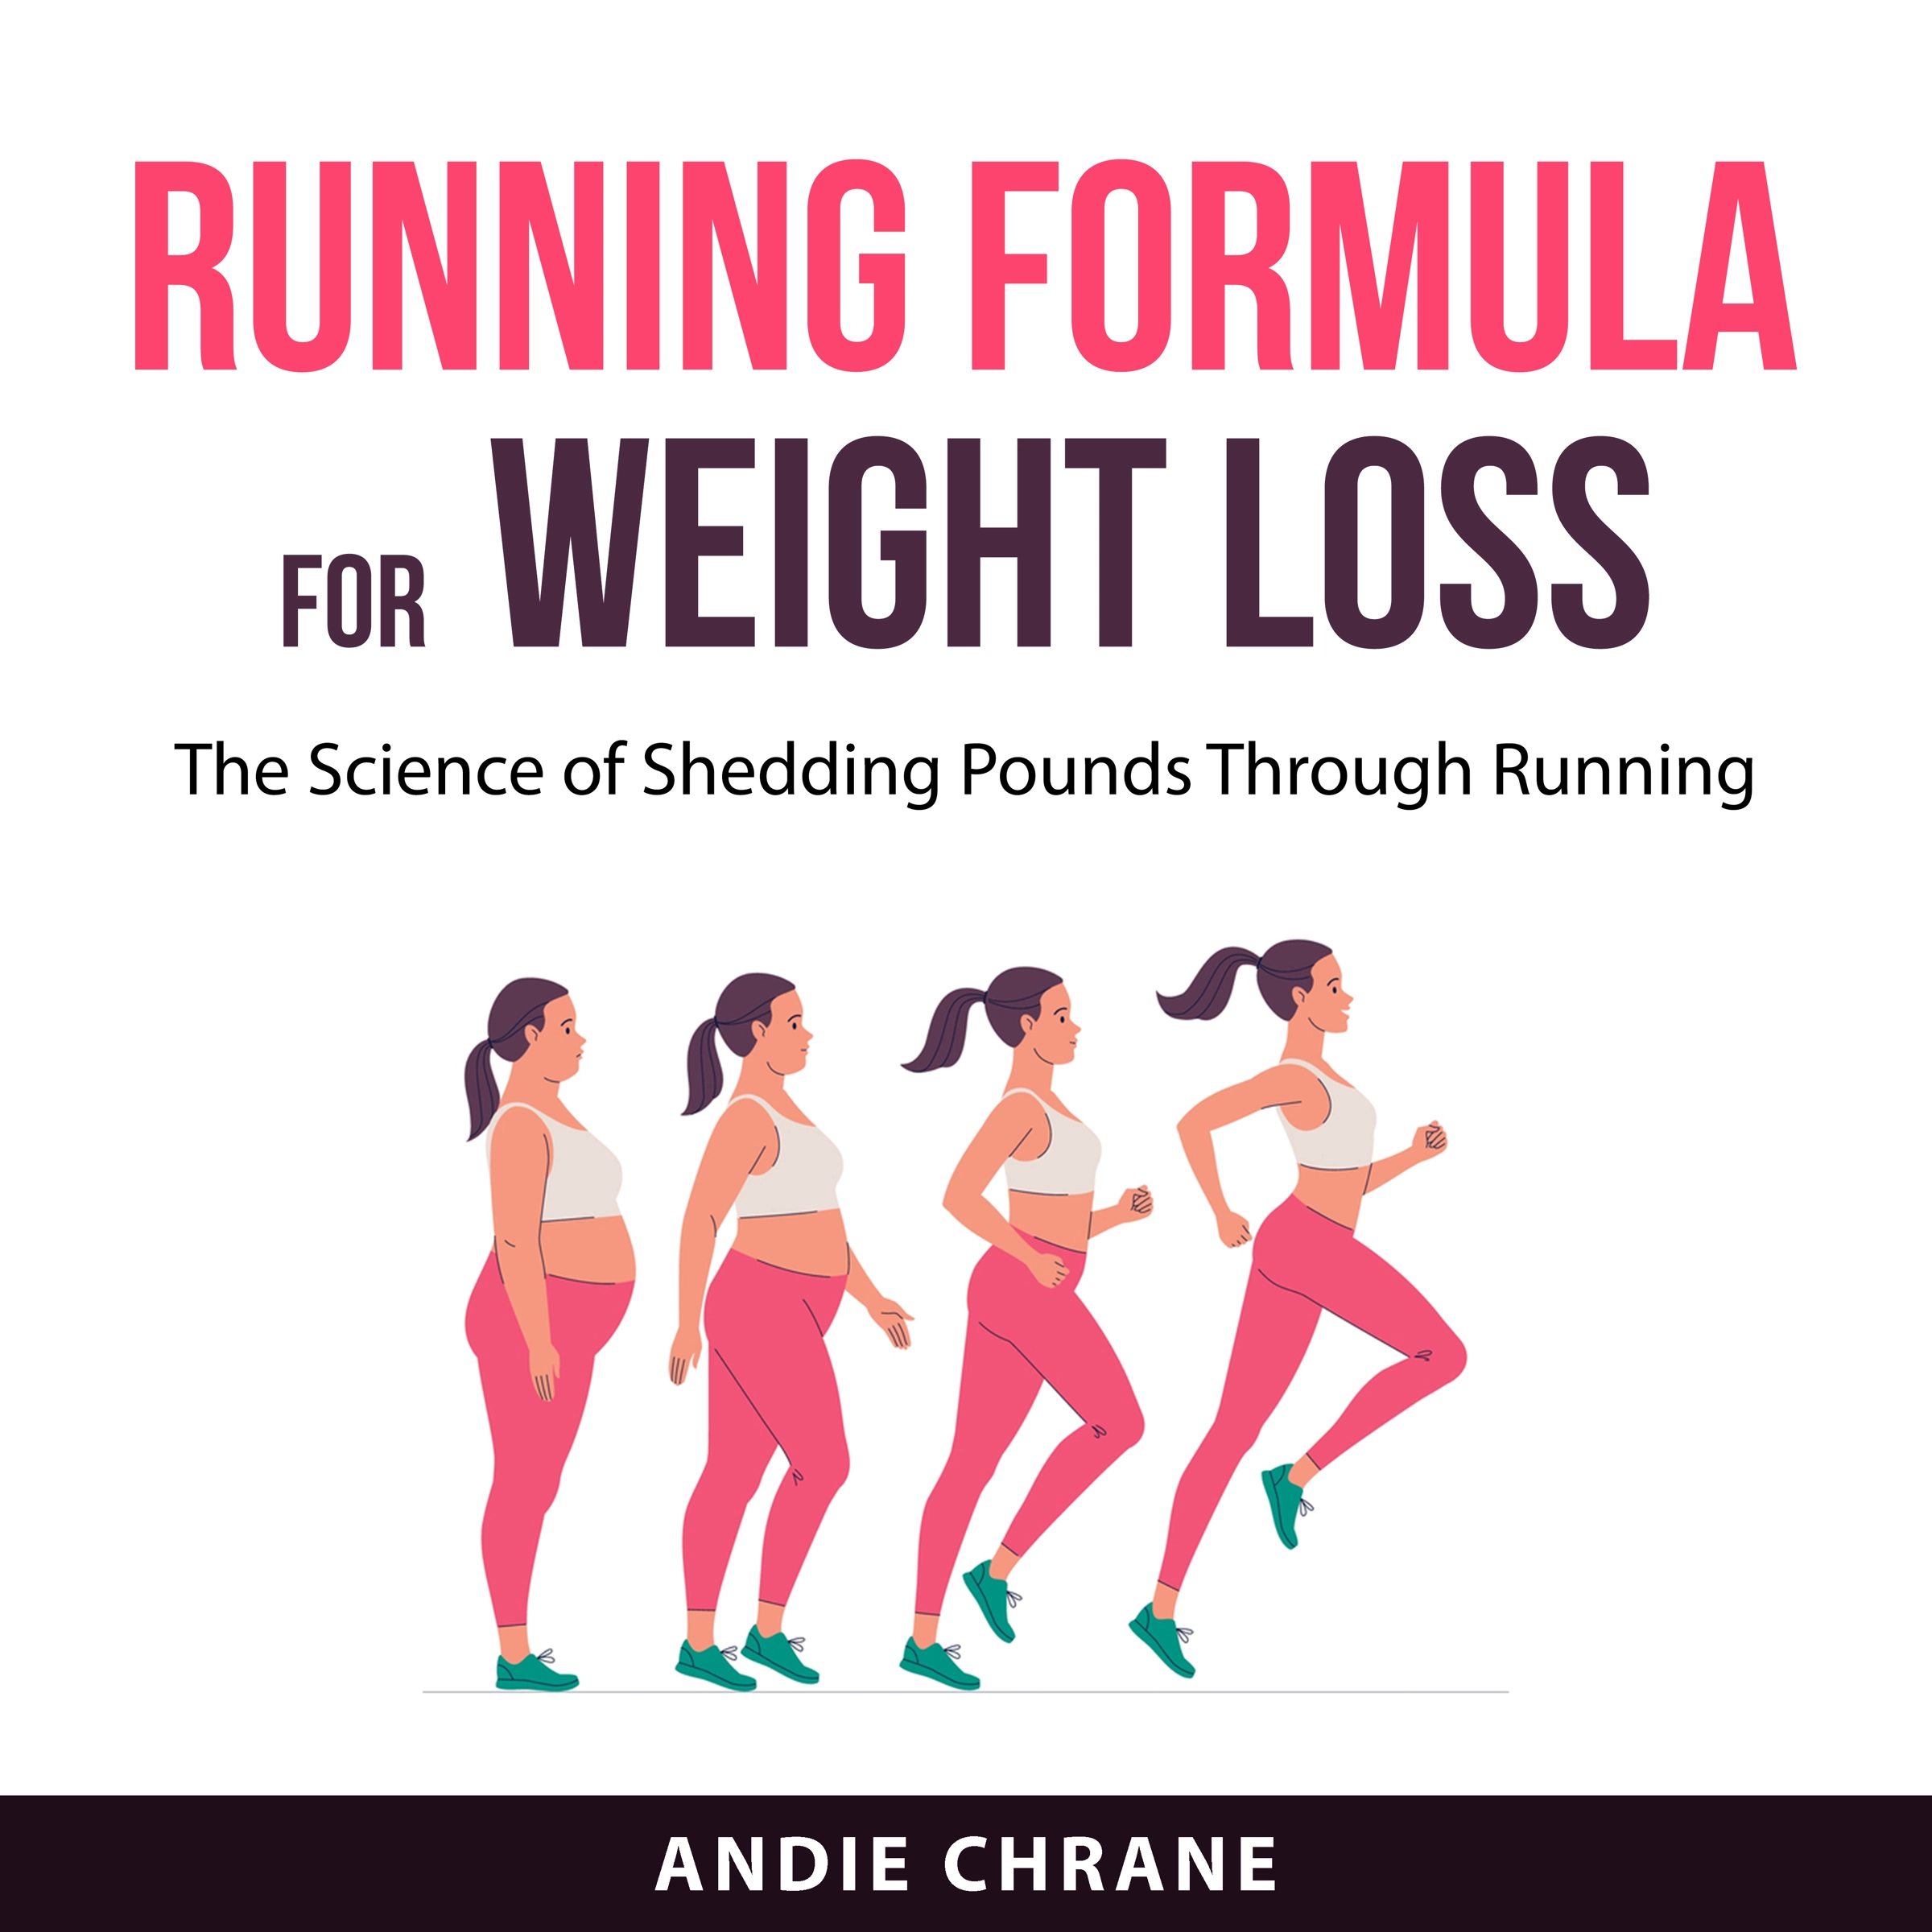 Running Formula for Weight Loss Audiobook by Andie Chrane